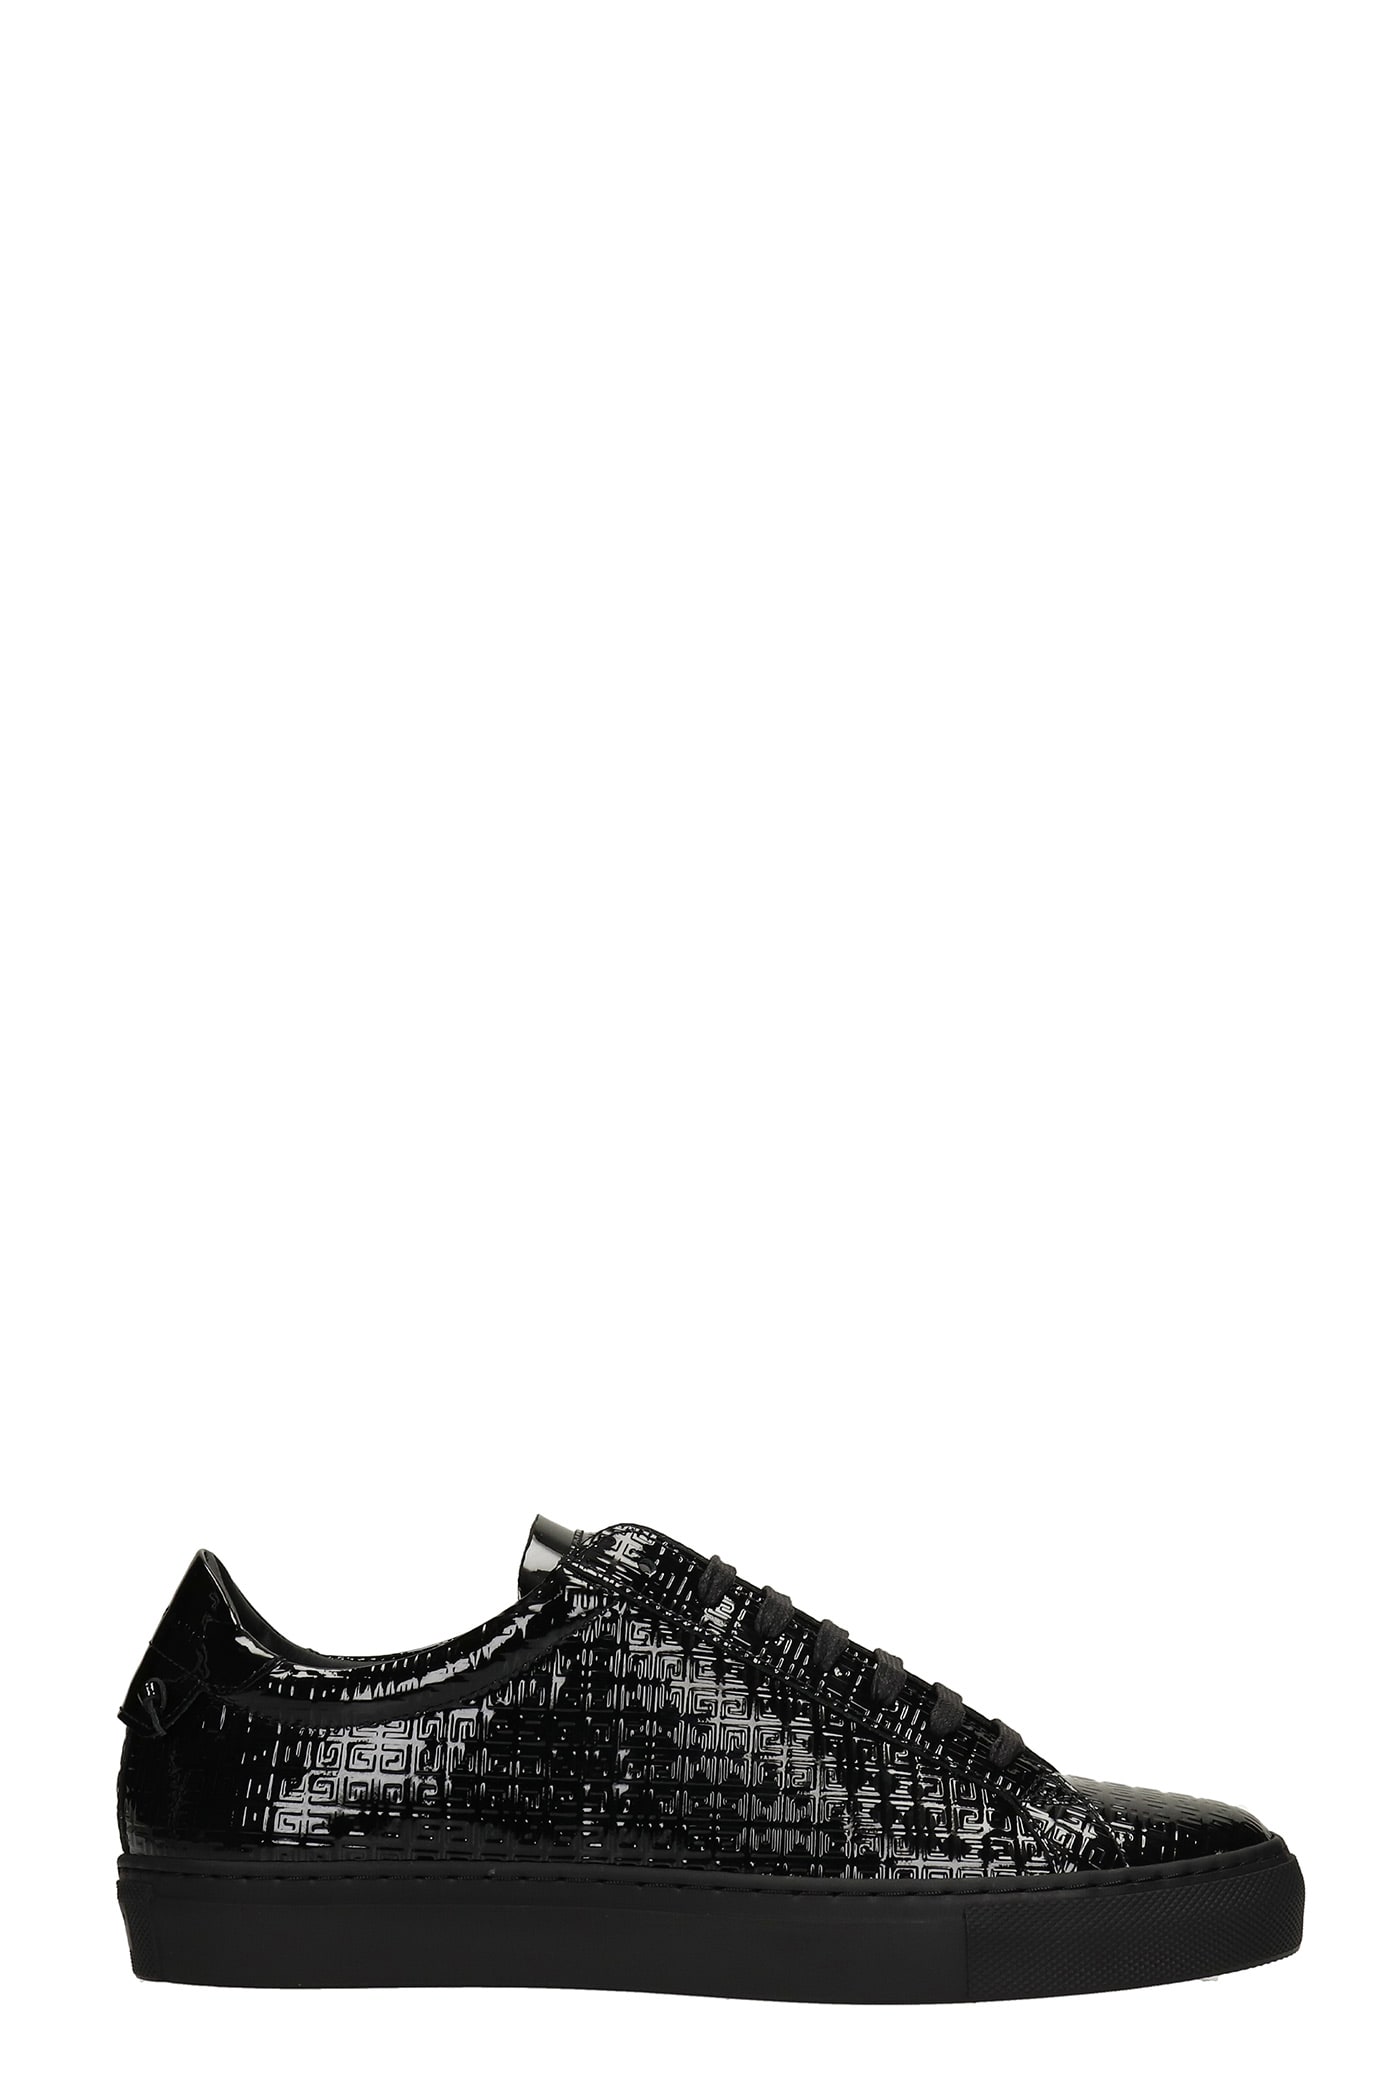 Givenchy Urban Street Sneakers In Black Patent Leather